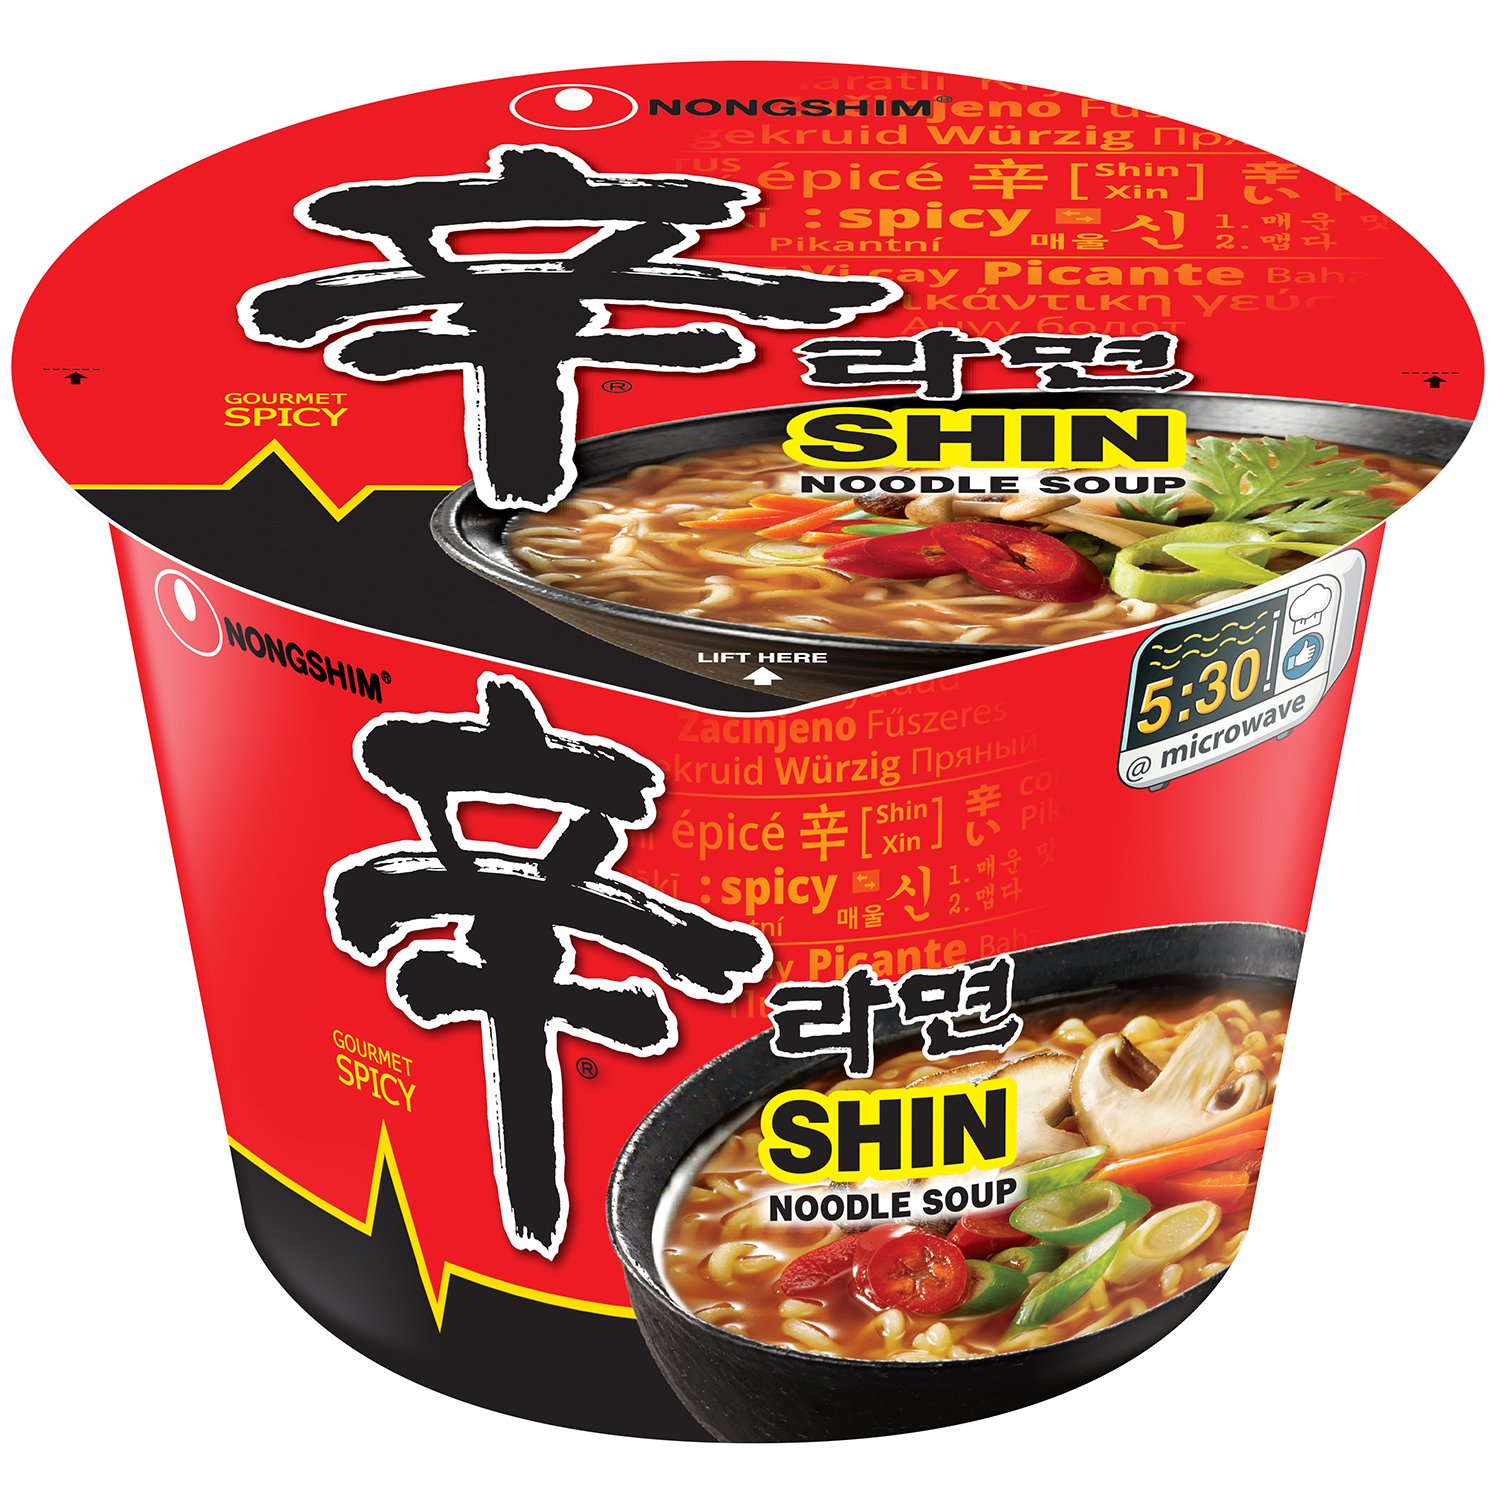 Nongshim Shin Gold Ramyun Noodle Soup with Chicken Broth, Gourmet